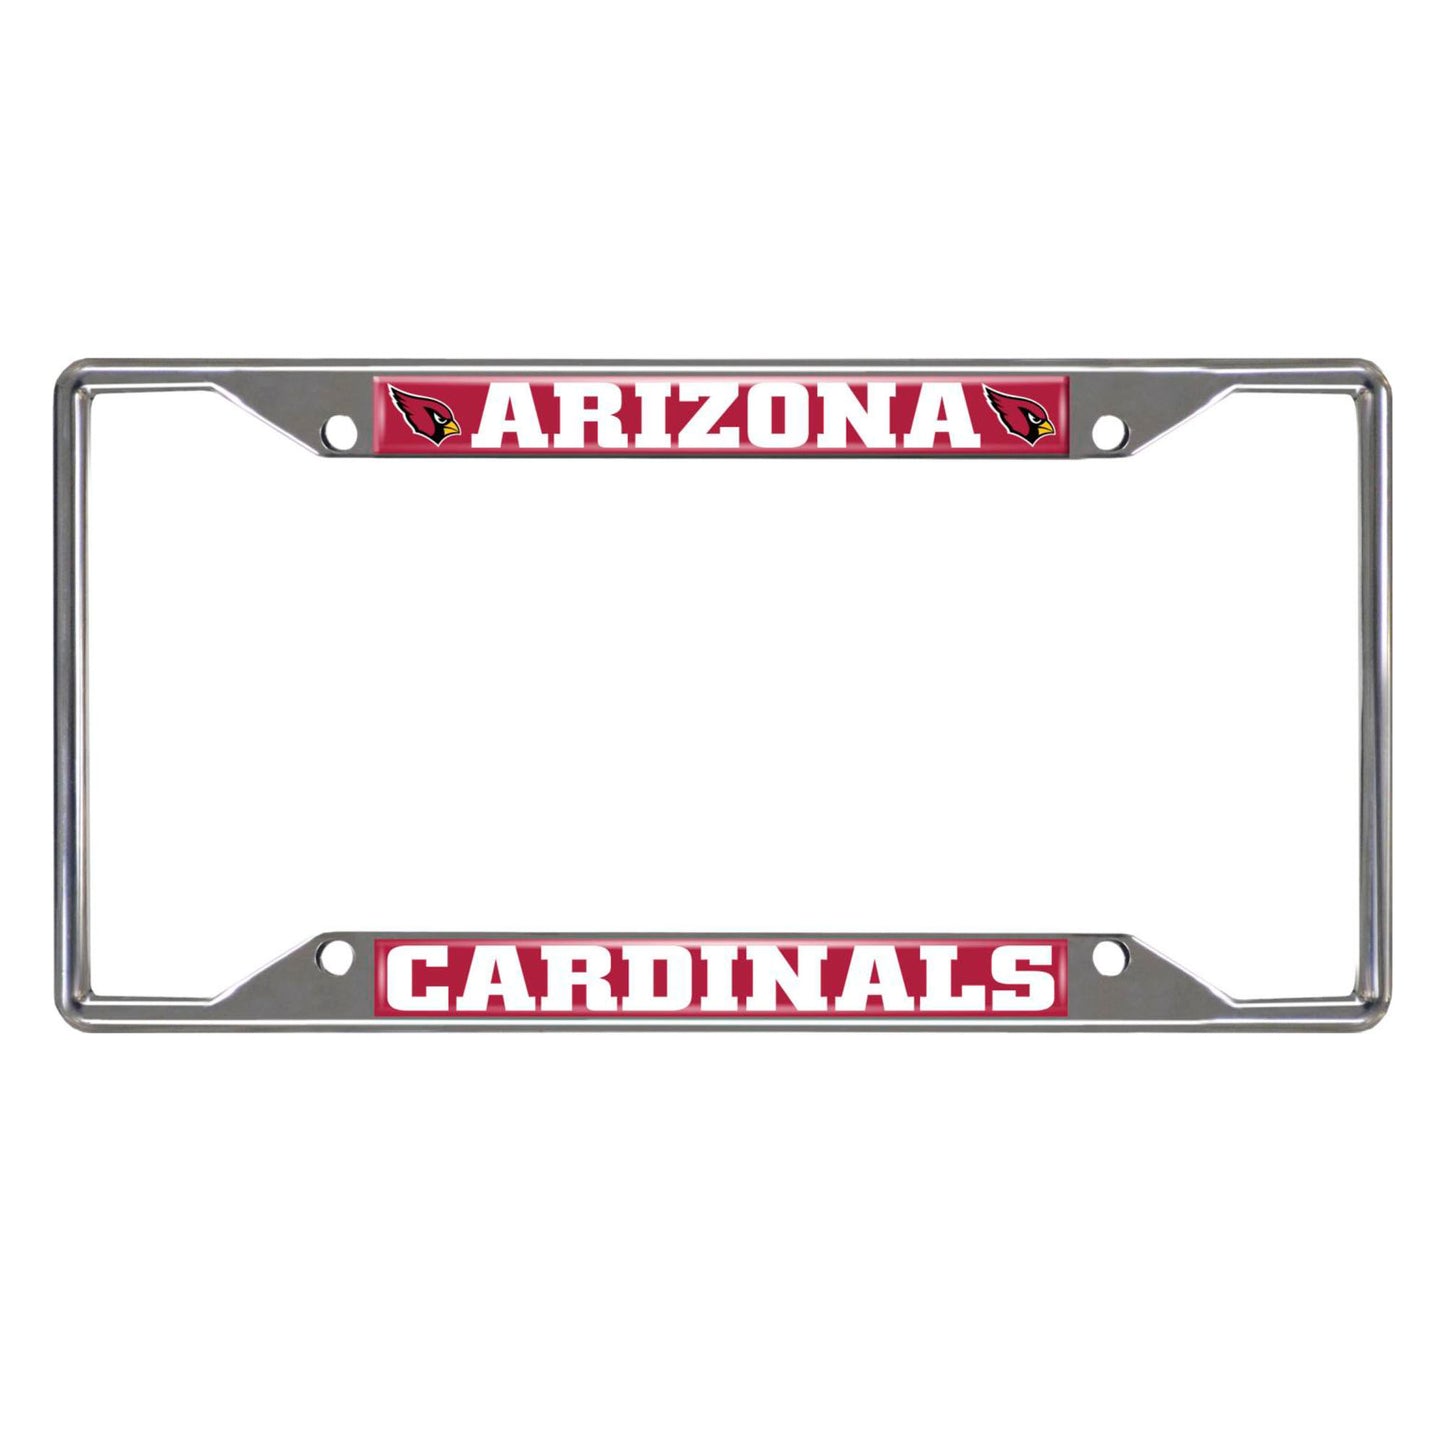 Arizona Cardinals Chrome Metal License Plate Frame, 6.25in x 12.25in